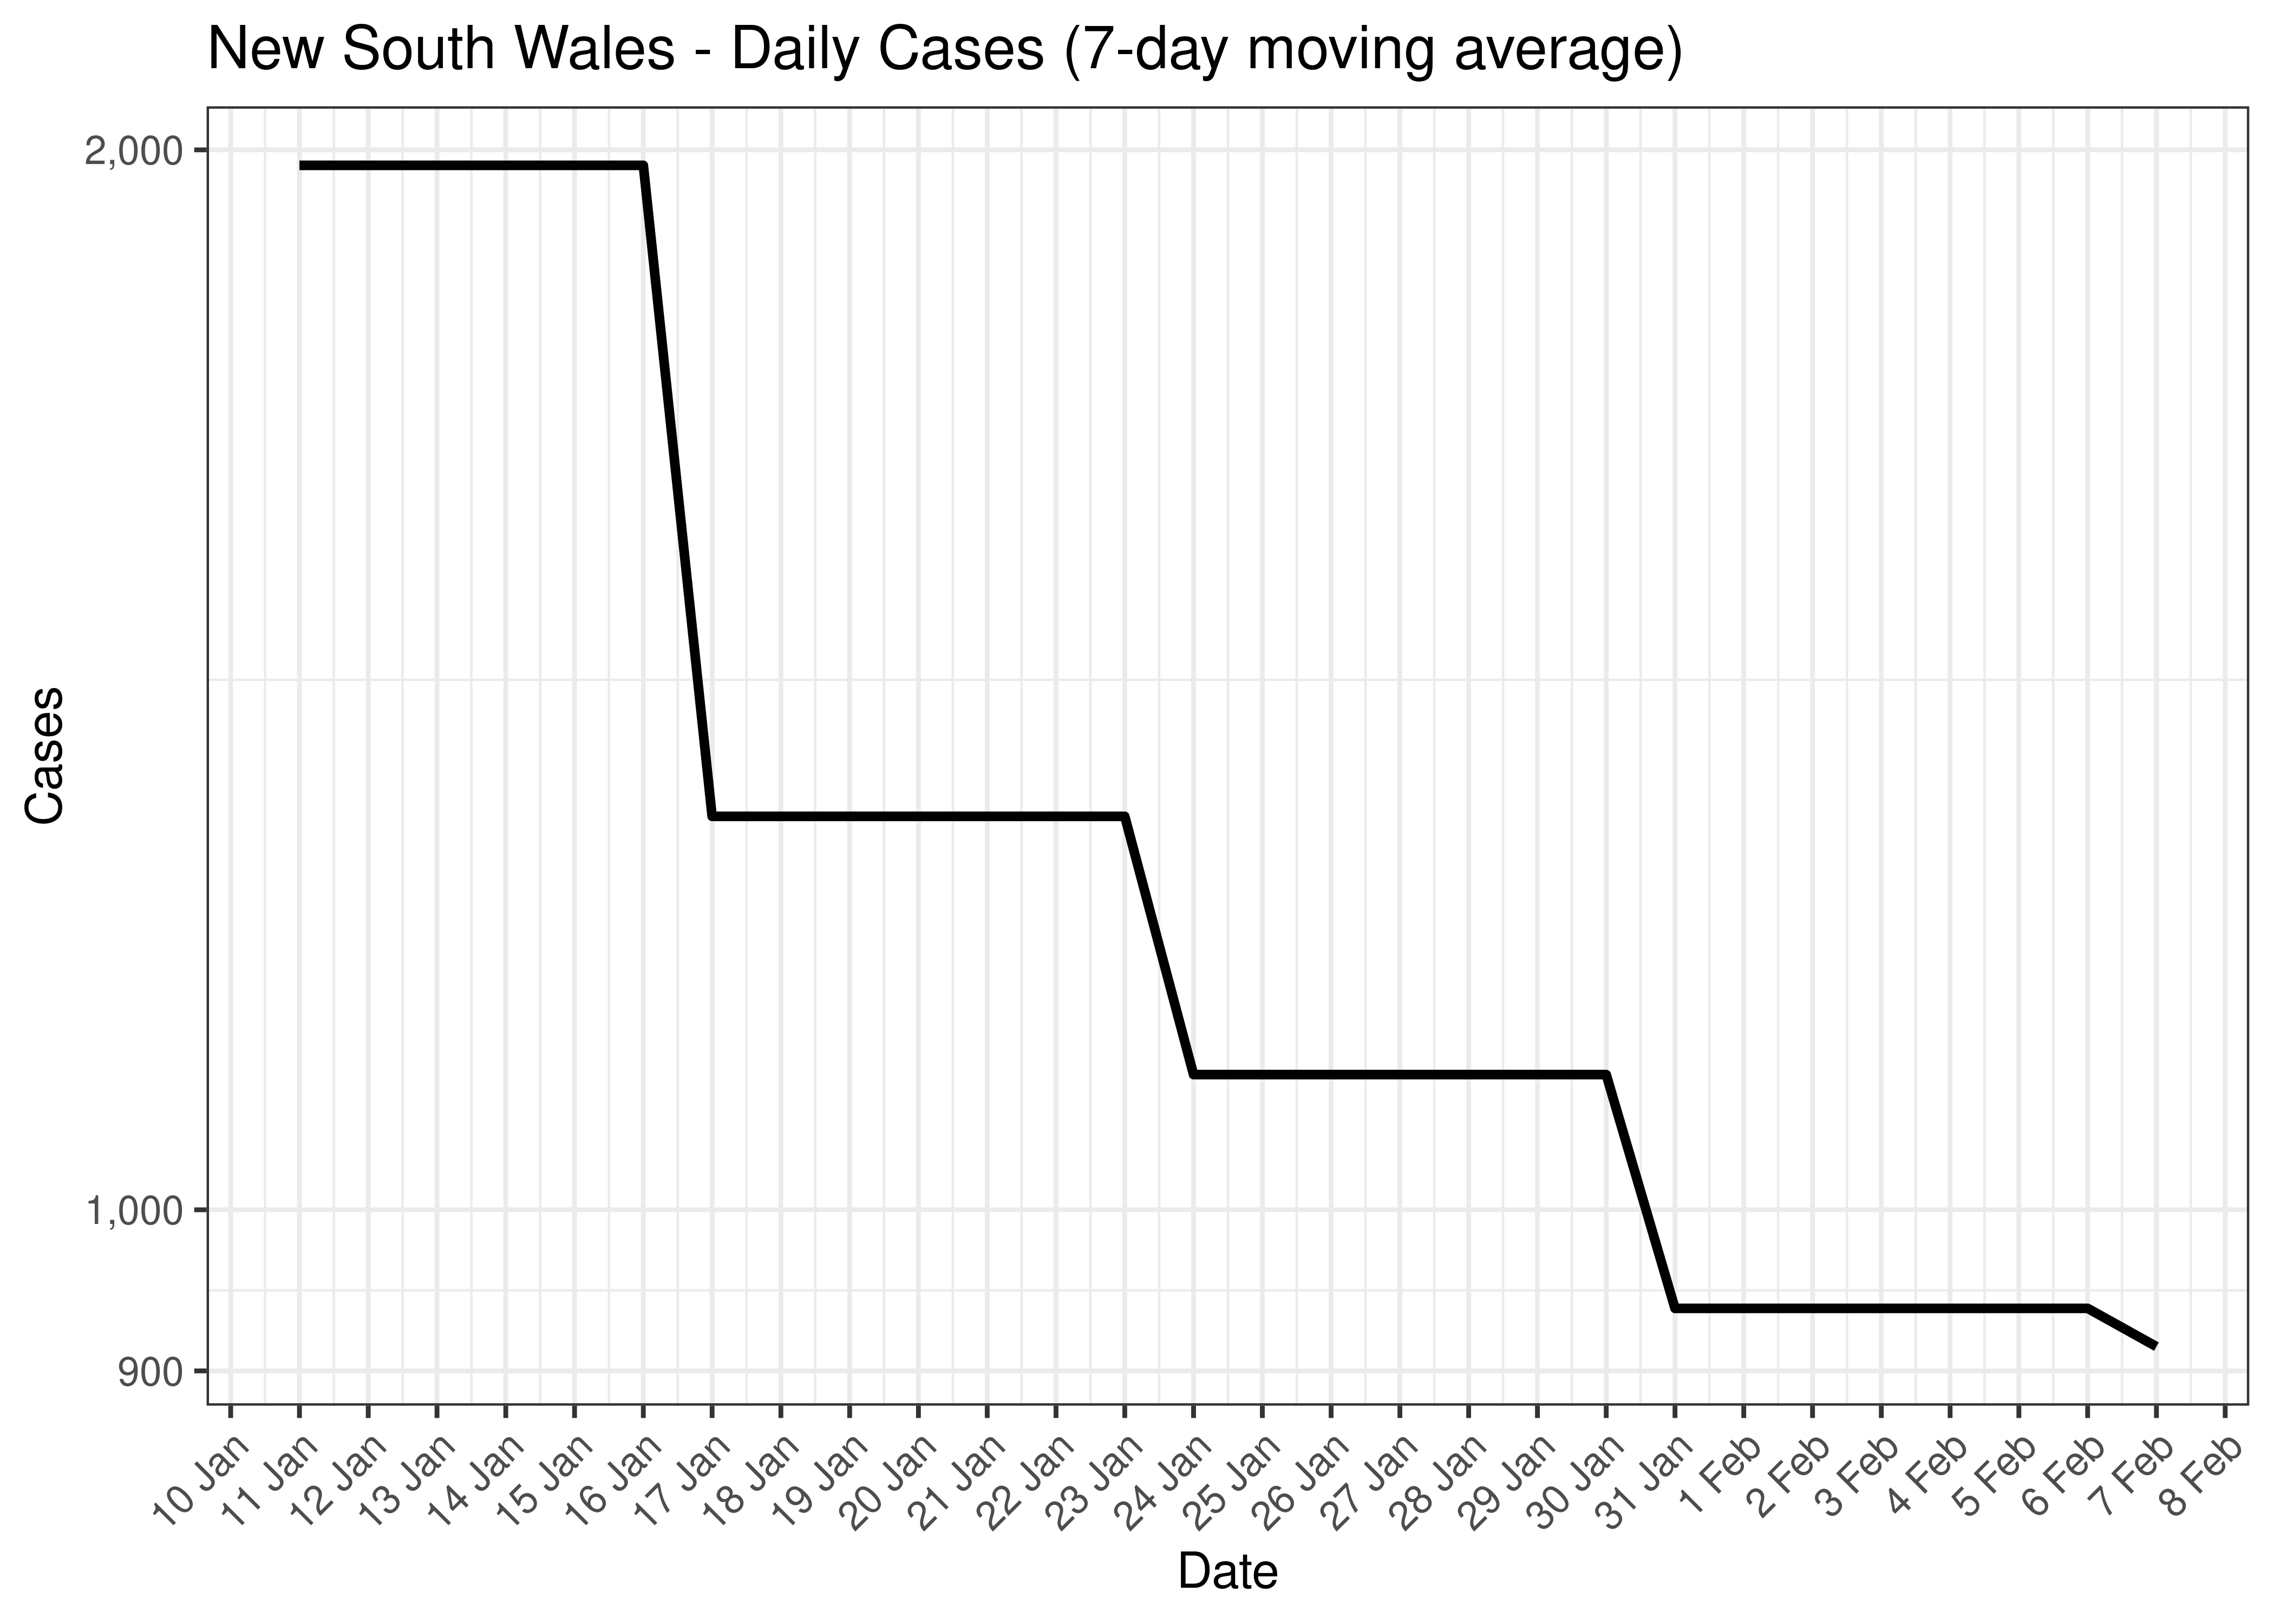 New South Wales - Daily Cases for Last 30-days (7-day moving average)